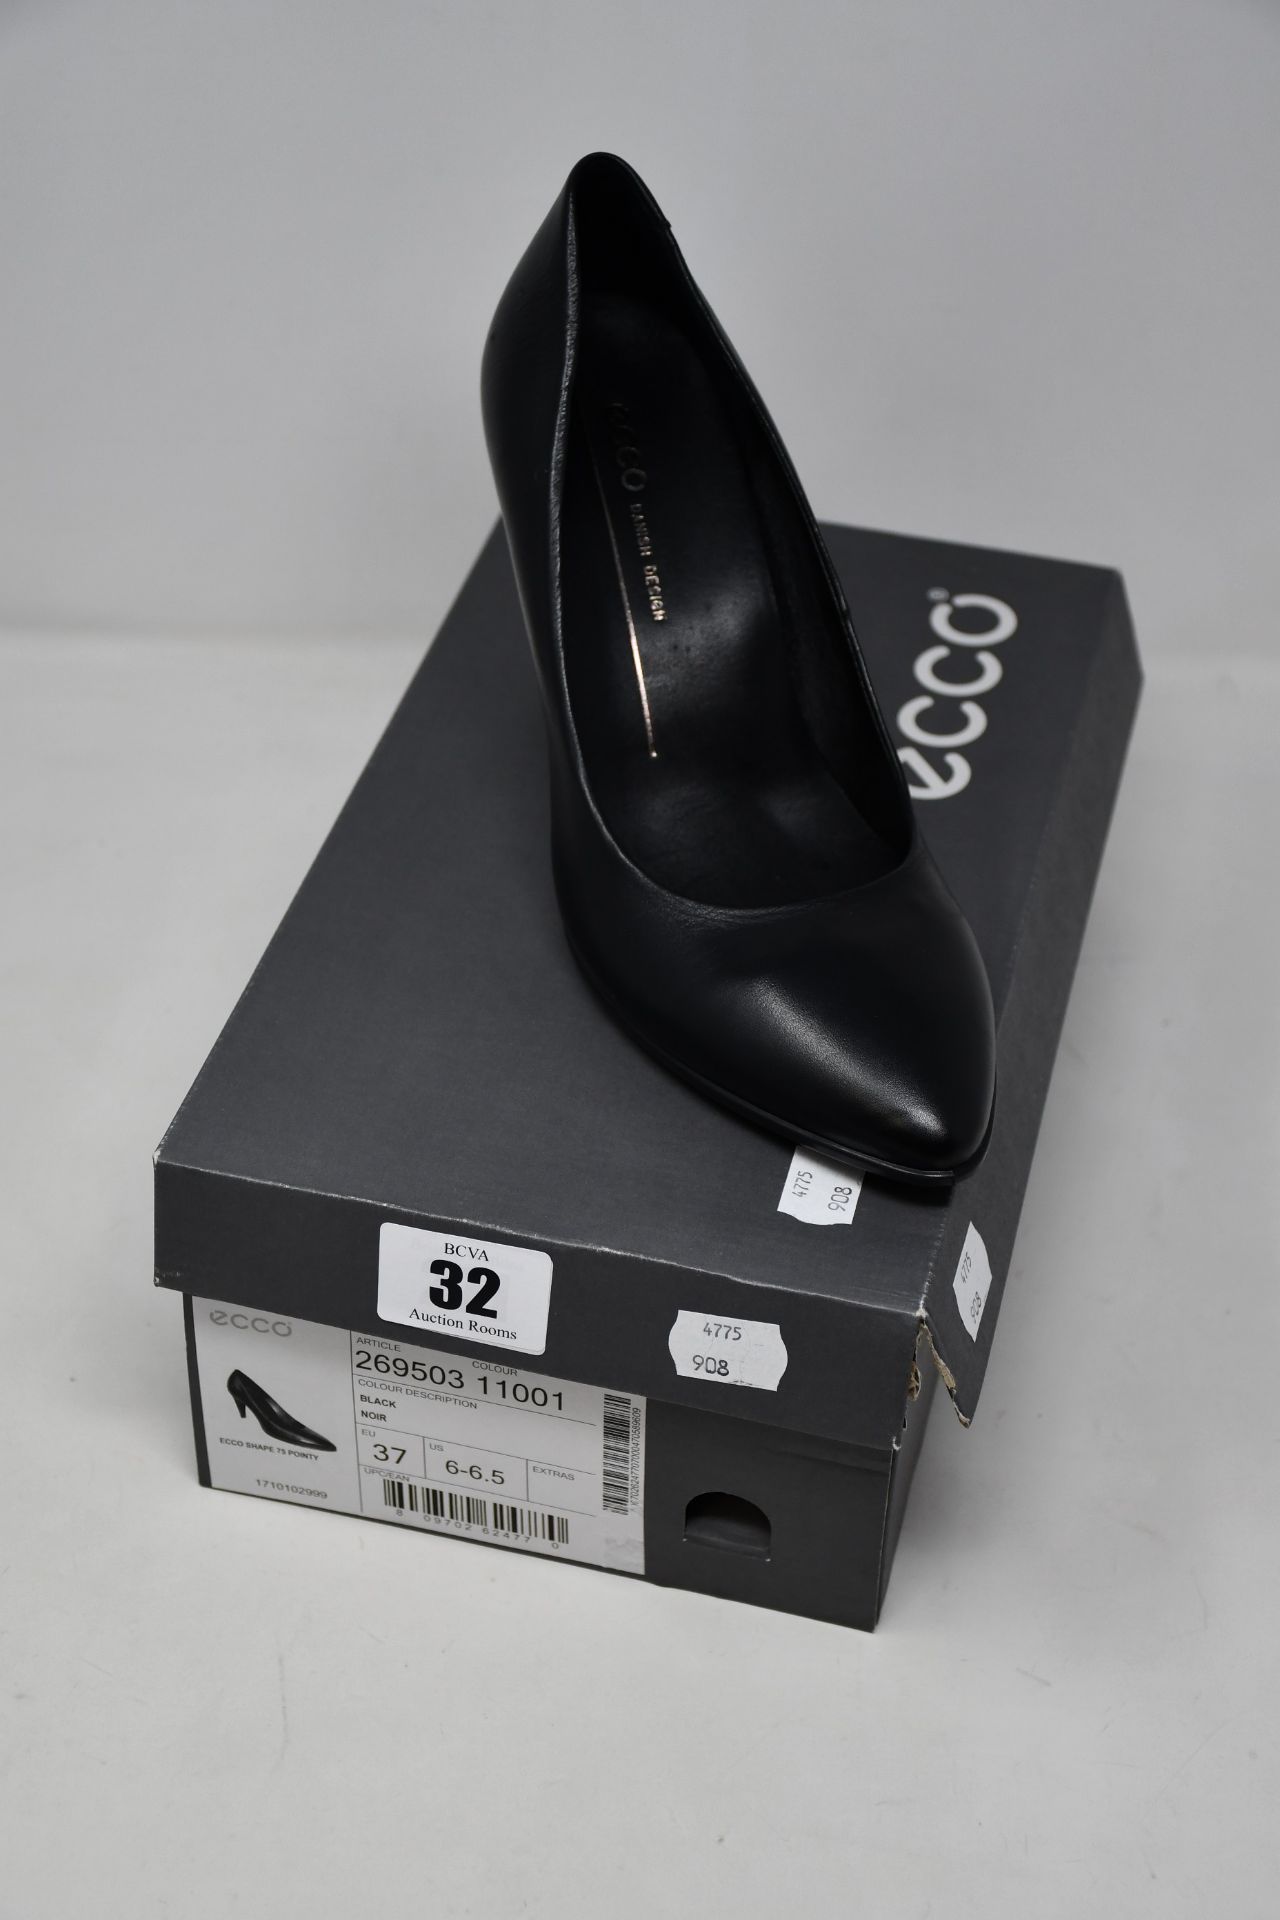 A pair of as new Ecco Shape 75 Pointy shoes (UK 6 - 6.5).